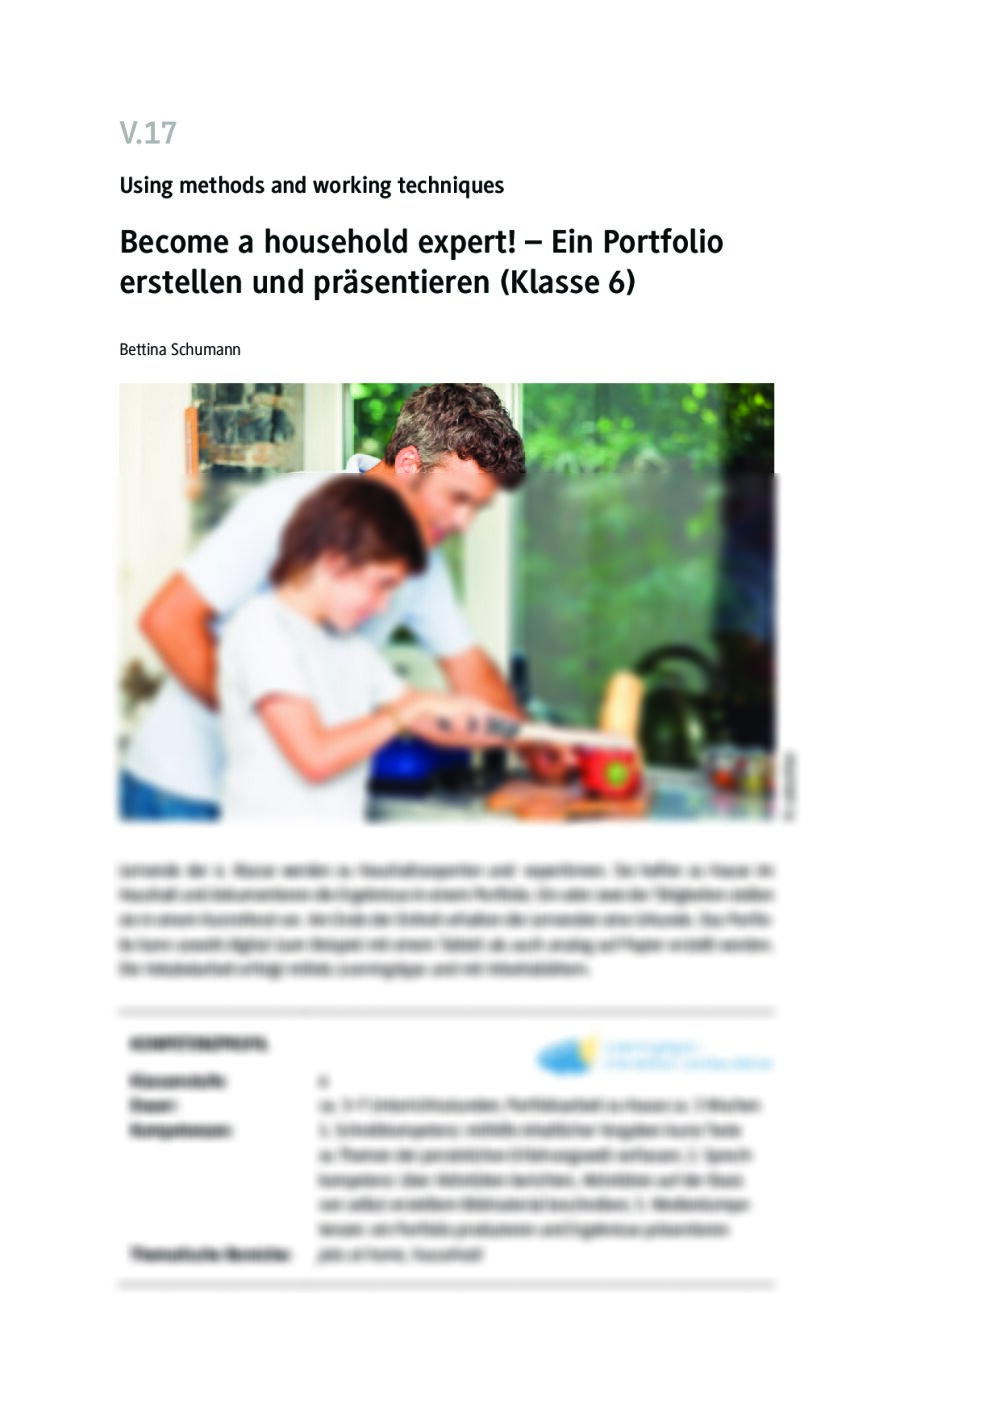 Become a household expert! - Seite 1